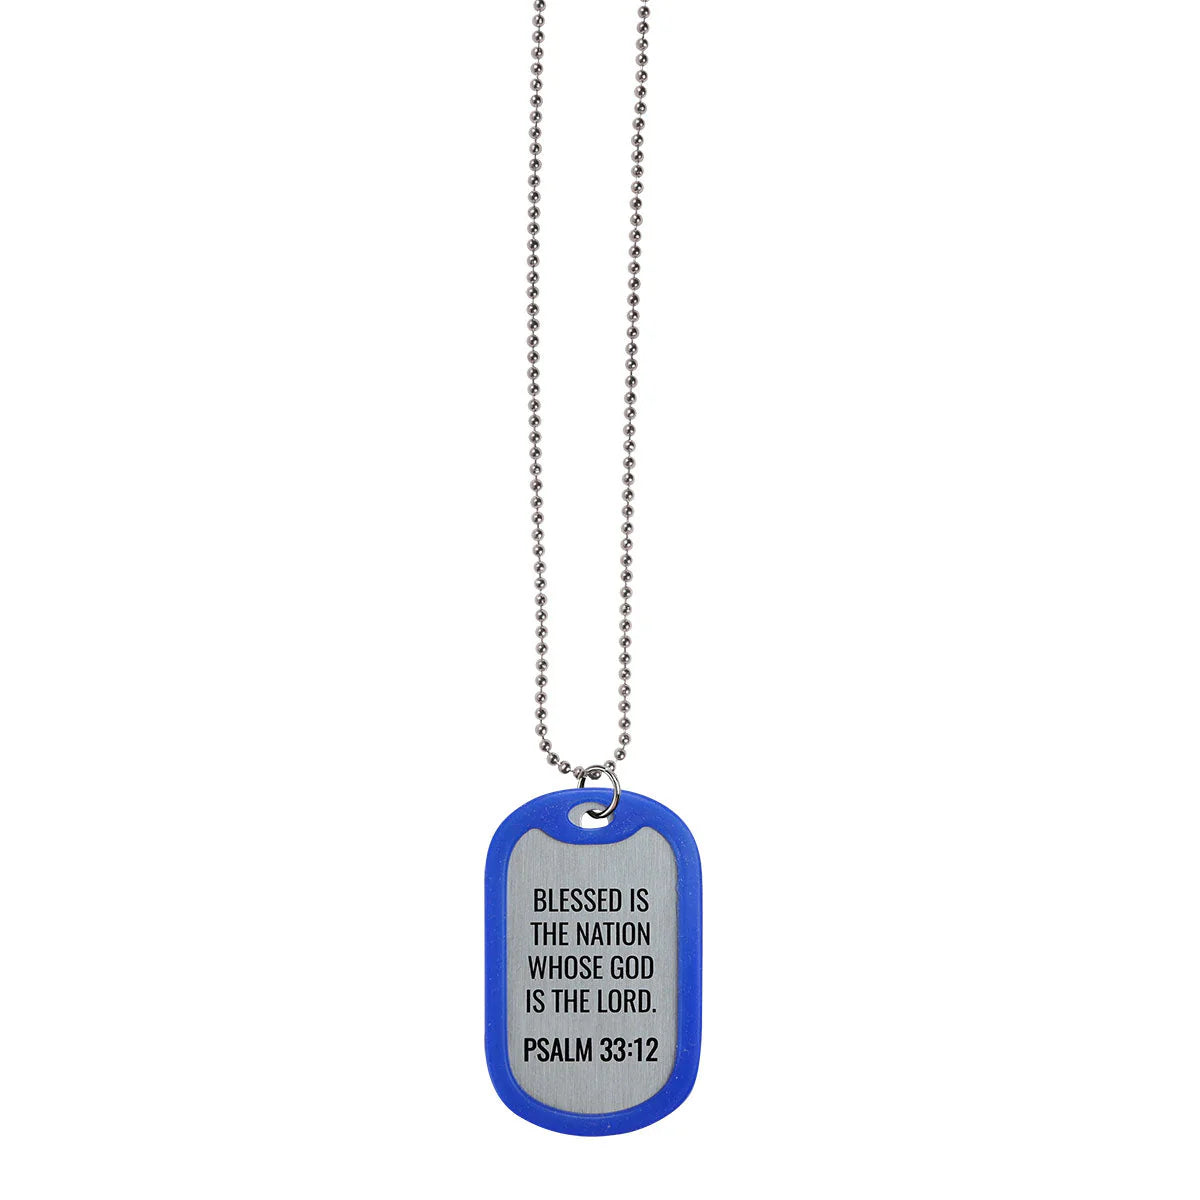 Faith Gear Dogtag Necklace One Nation Kerusso® accessories jewelry Mens